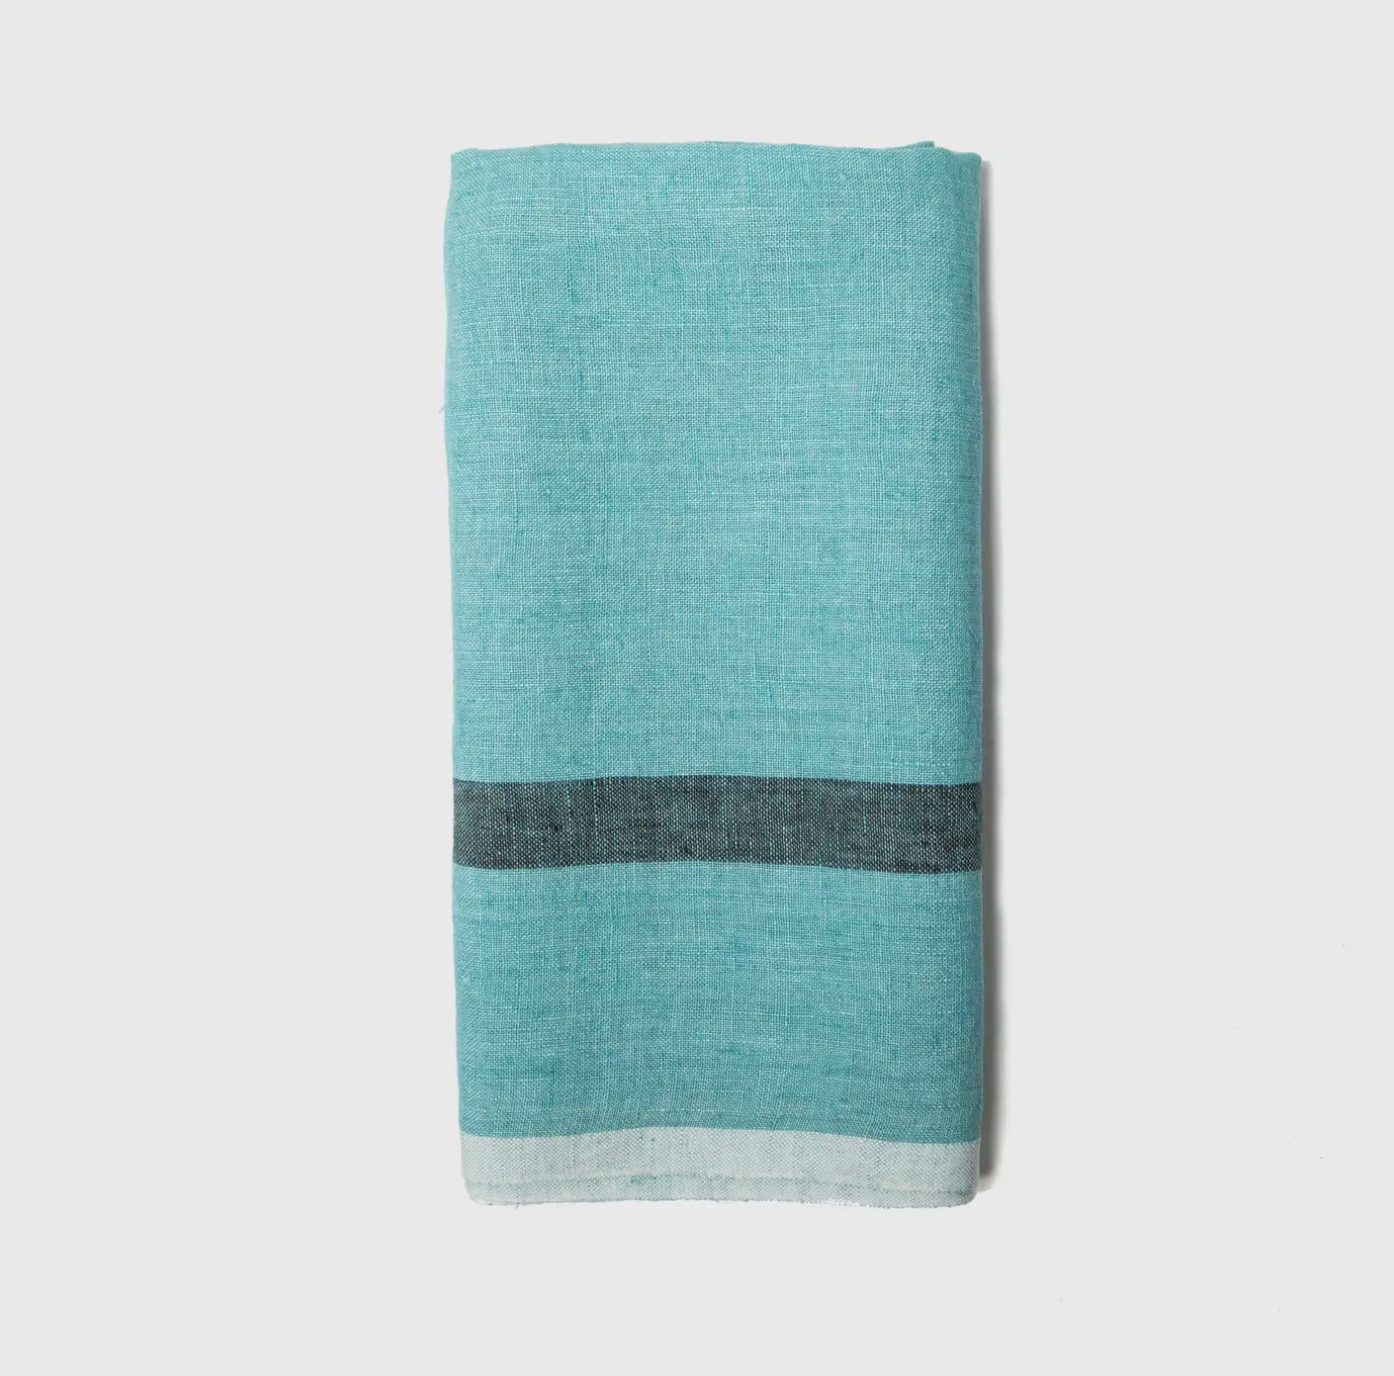 Laundered Linen Towels